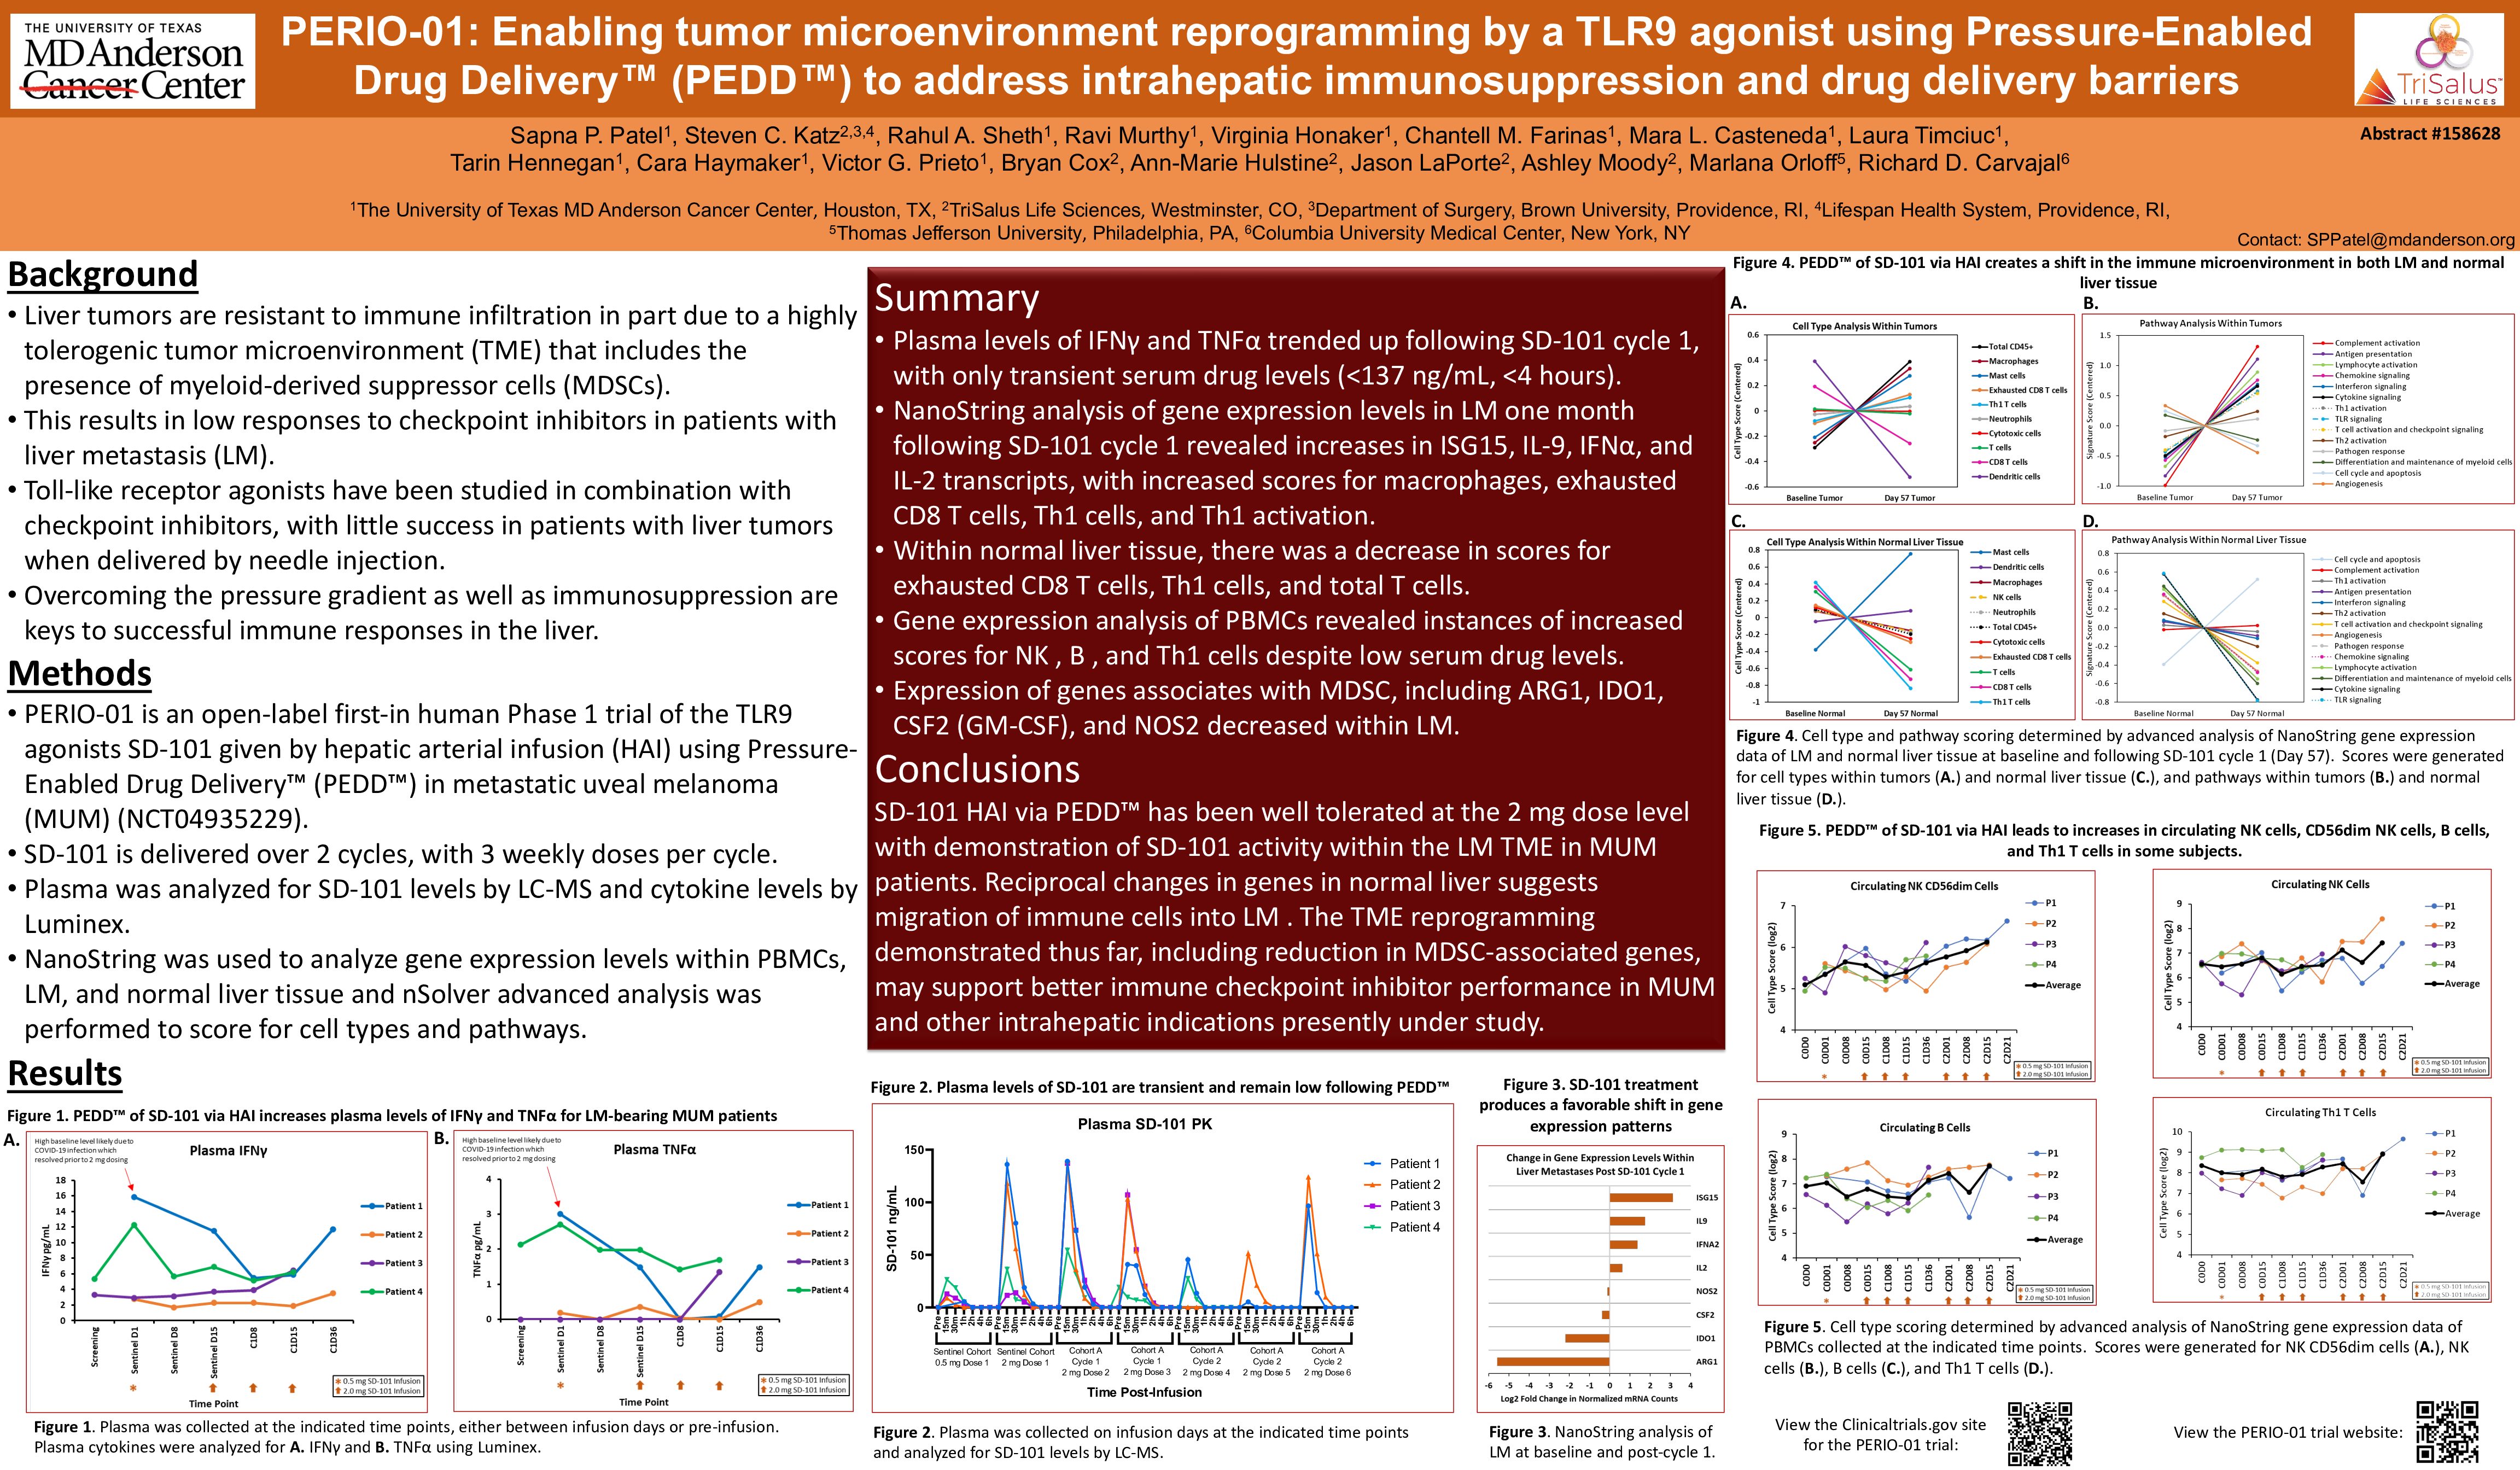 Early Data from PERIO-01 Presented at Recent Society for Immunotherapy of Cancer (STIC) Workshop